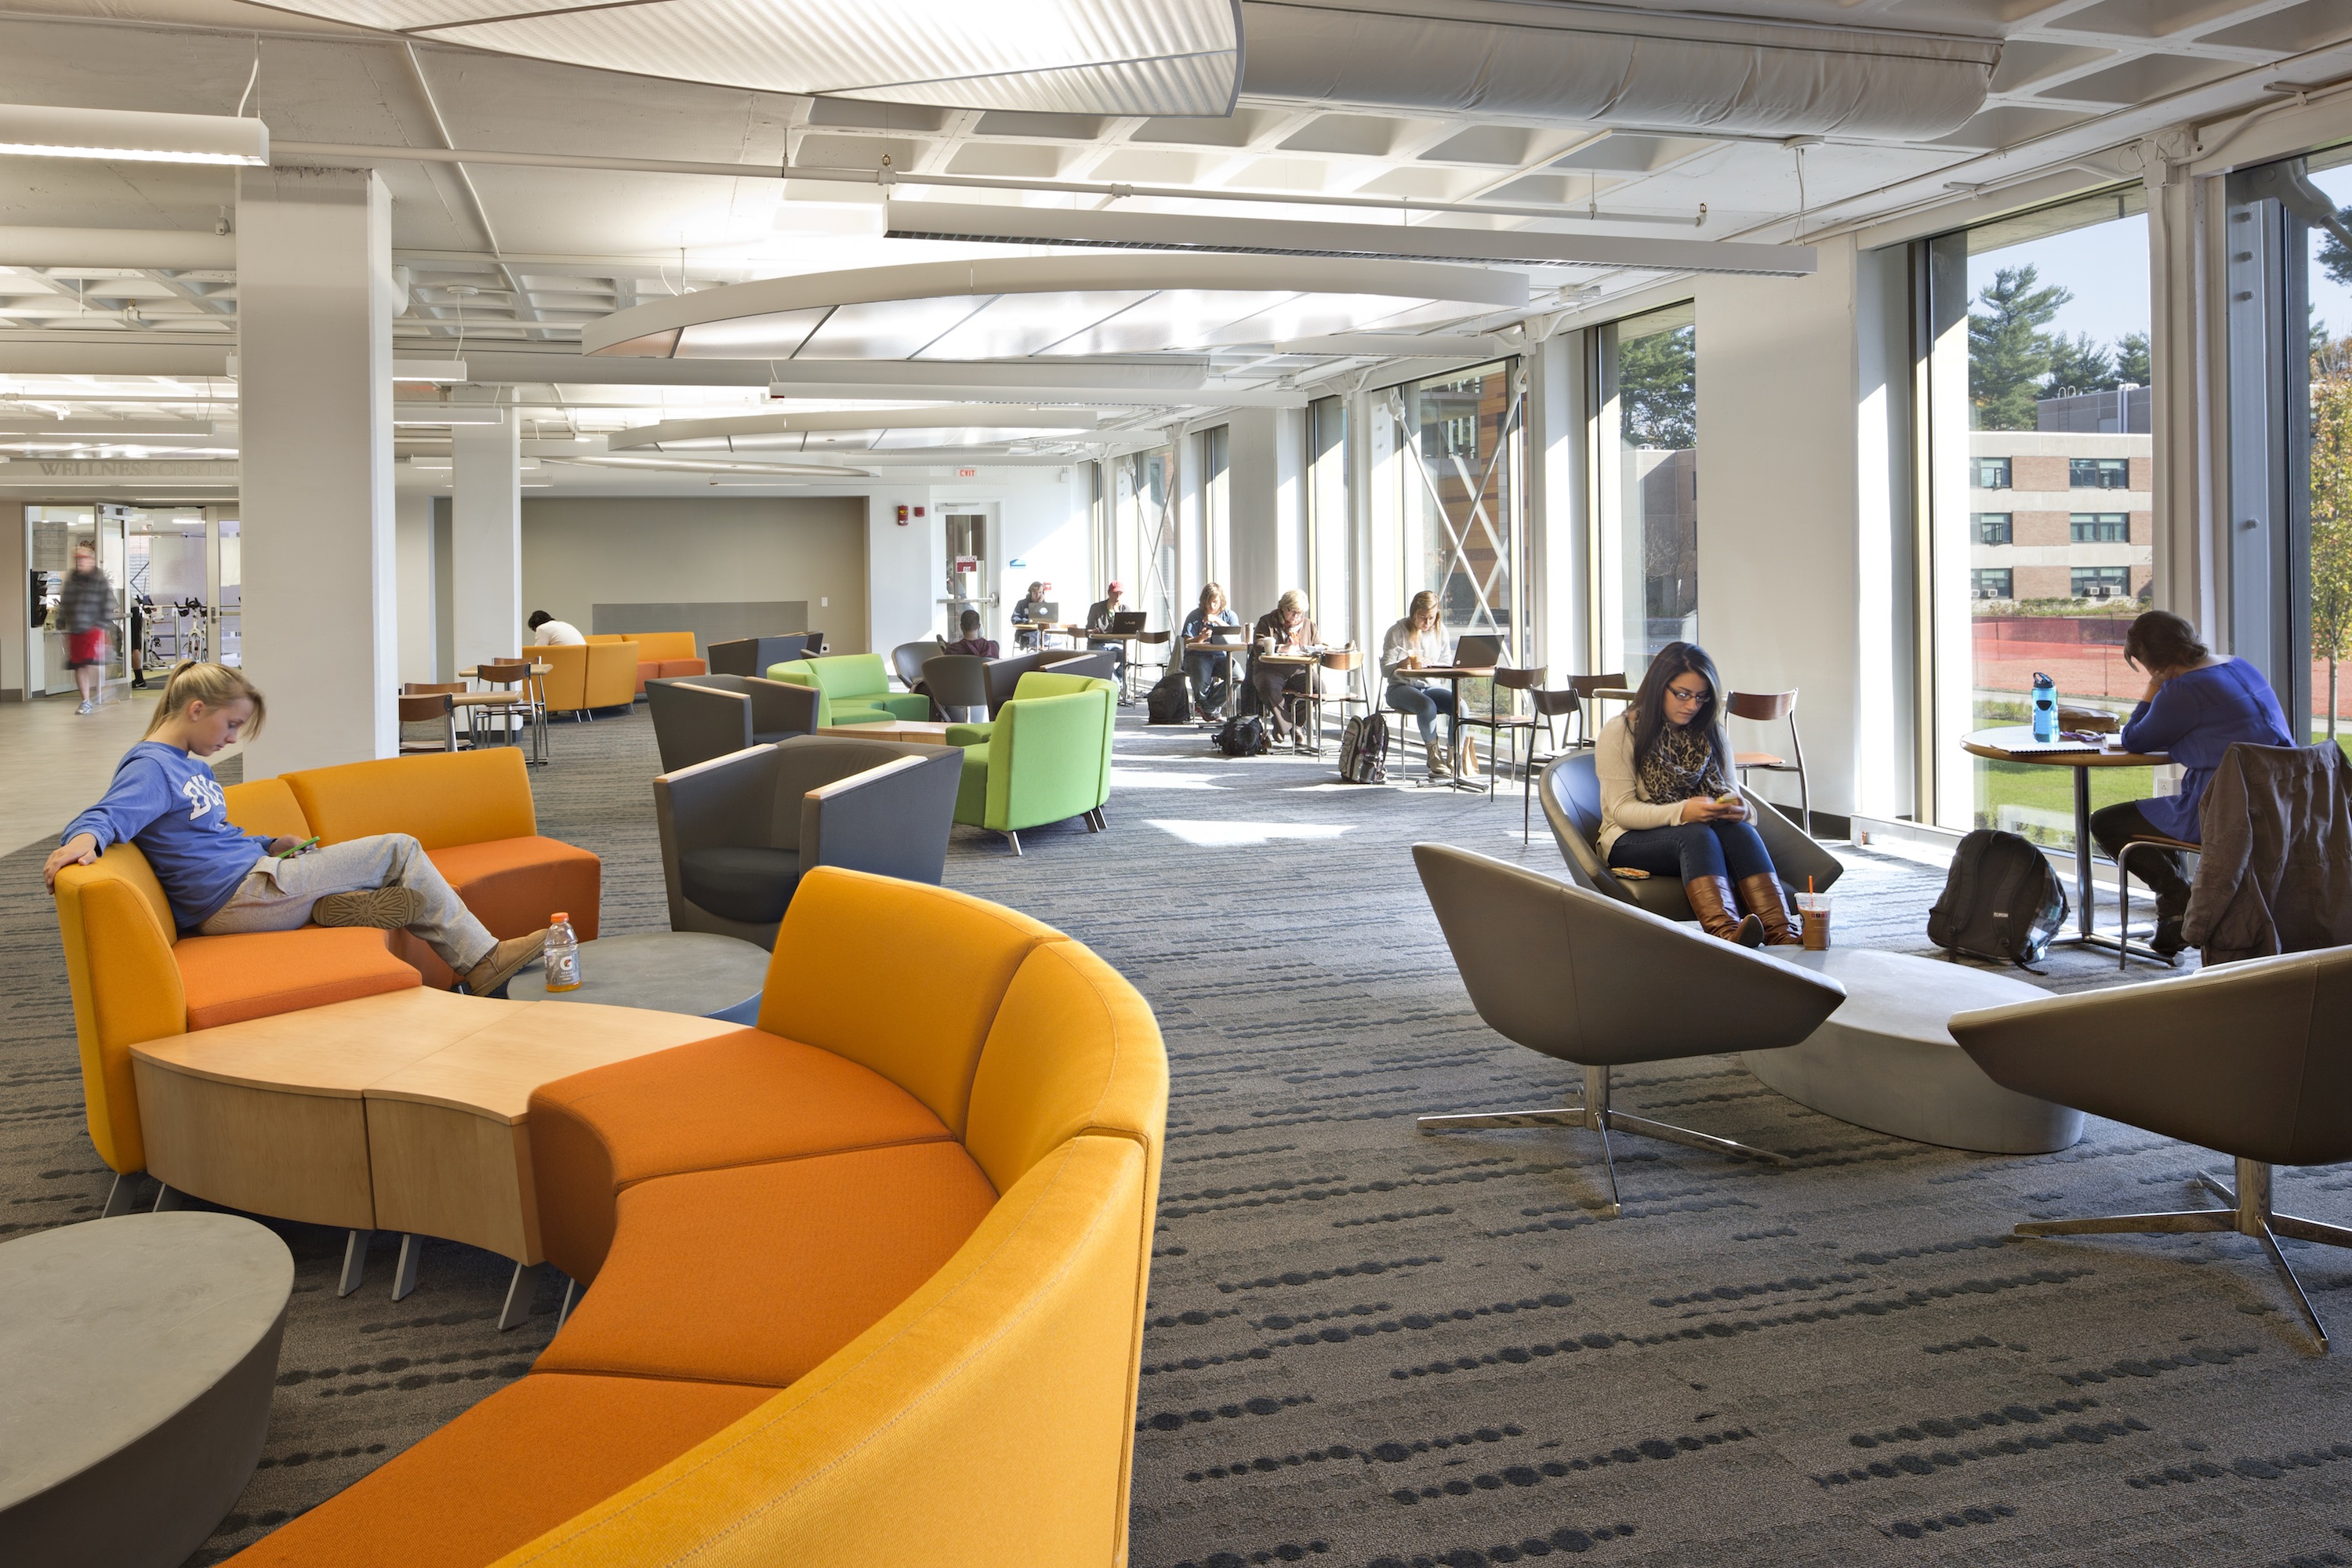 Furnishings at Ely Campus Center were selected in deep oranges, greens and blues to communicate vitality.